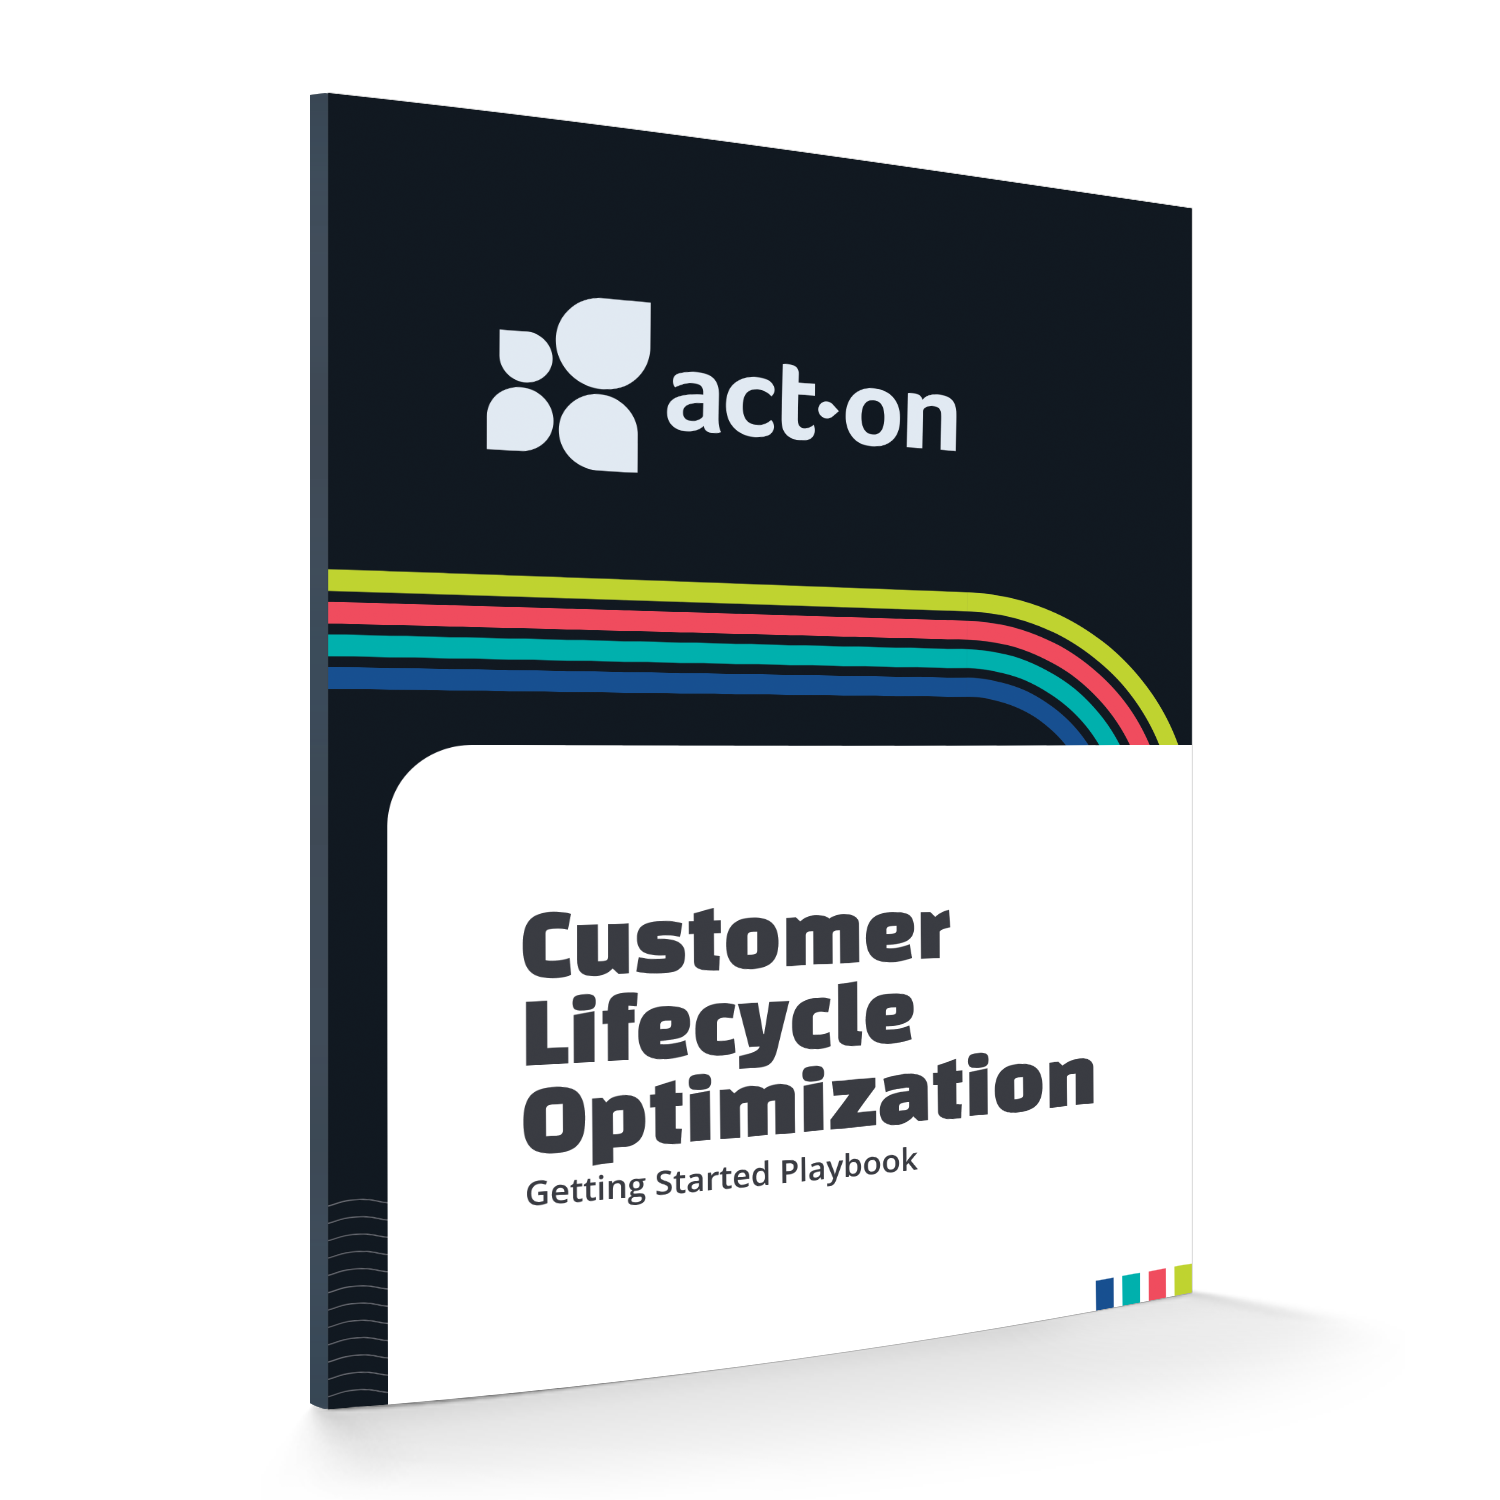 Ebook illustration with text that reads Act-On Customer Lifecycle Optimization, Getting Started Playbook